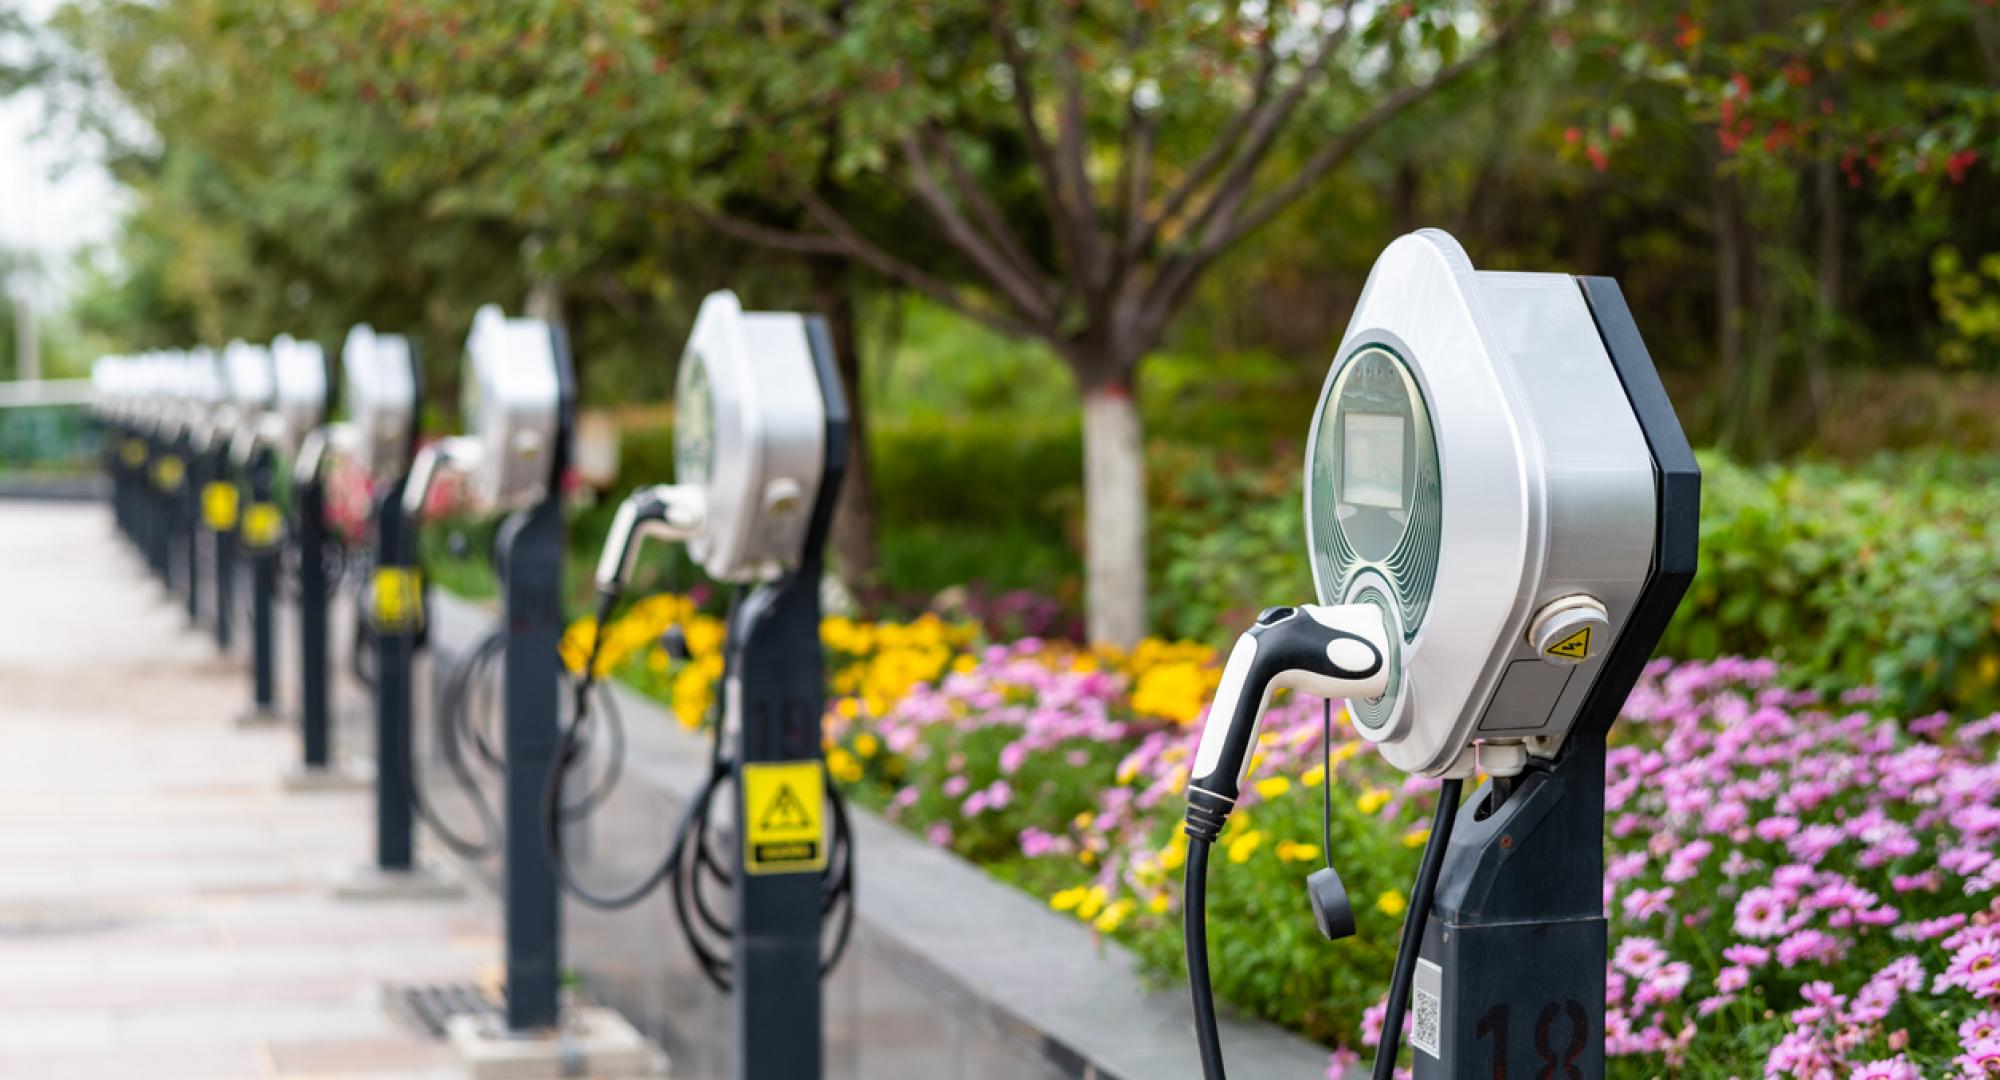 Electric car chargers in public park